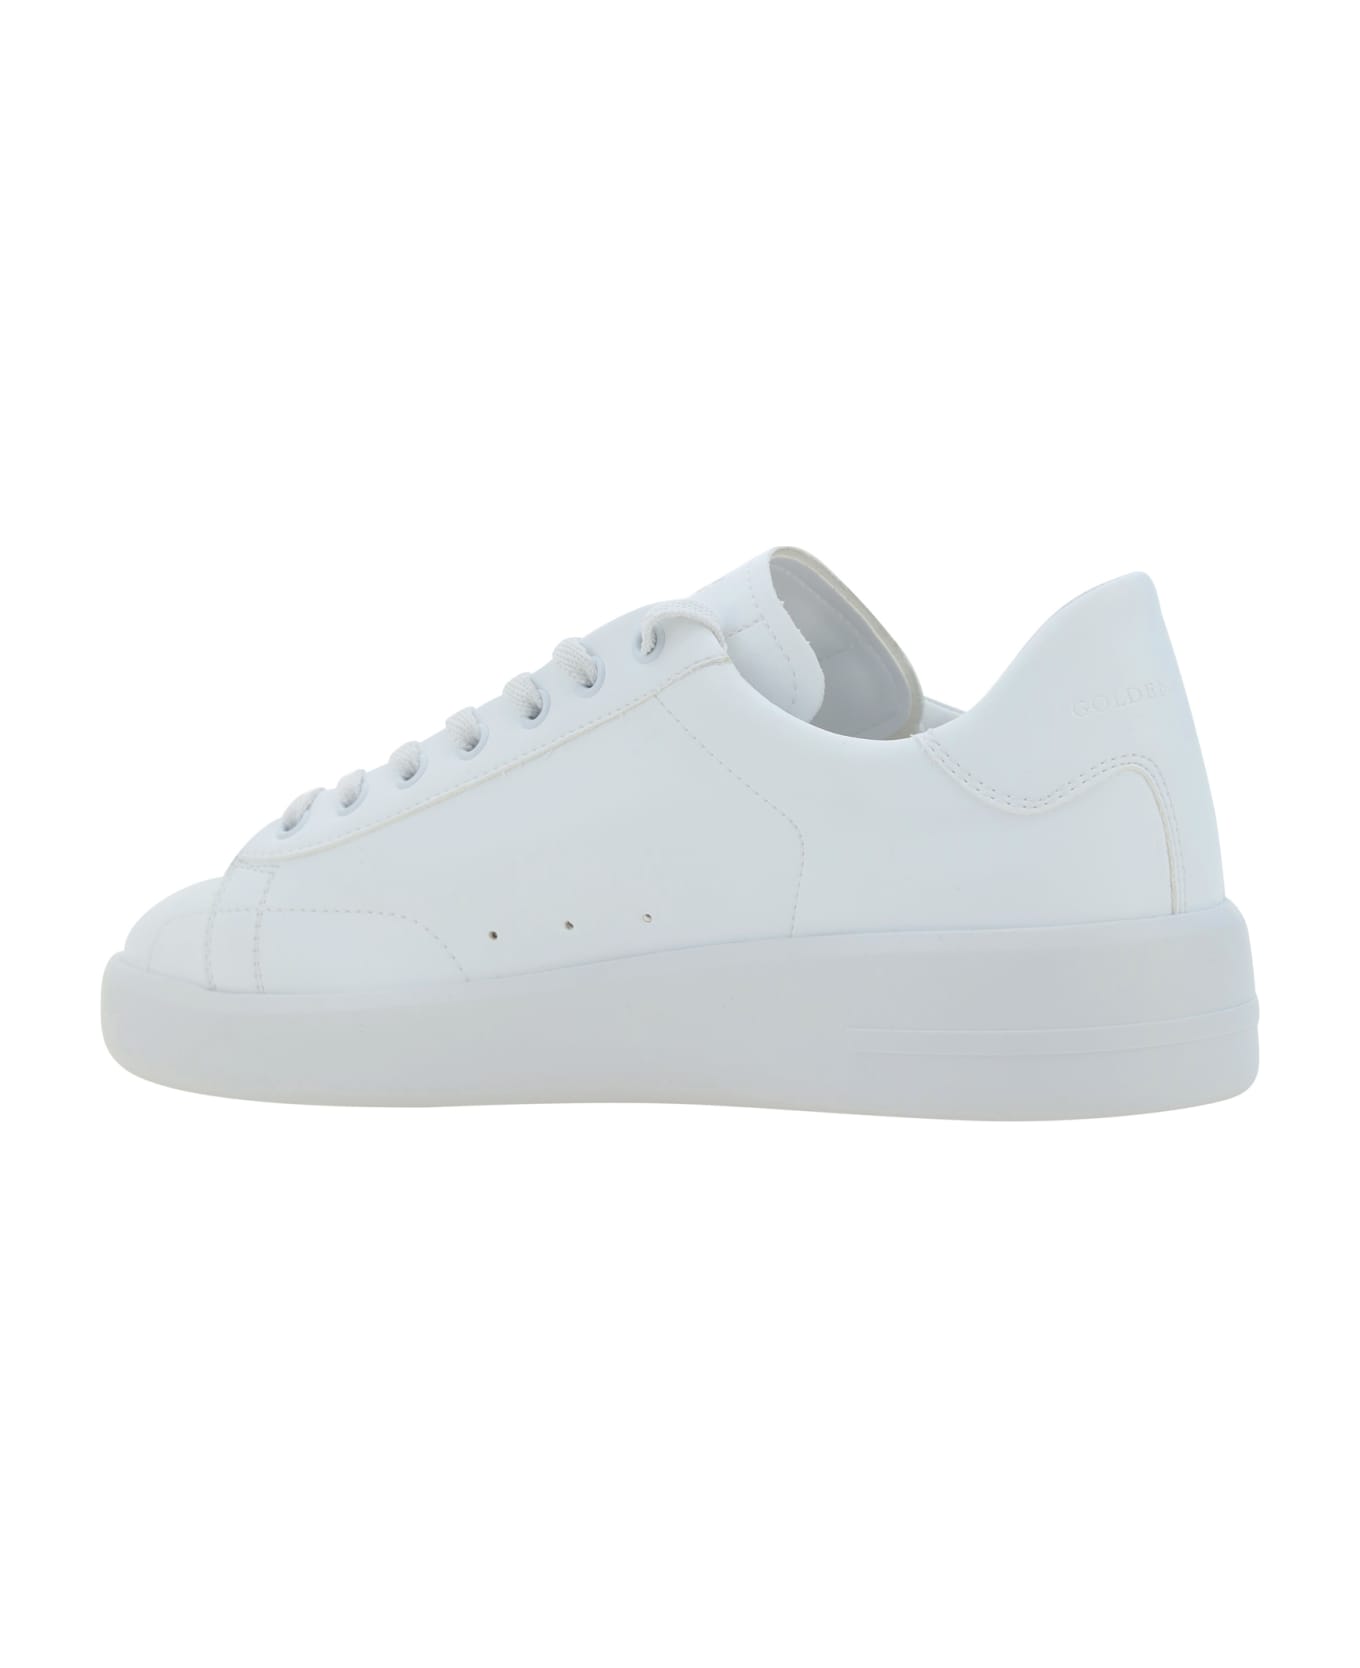 Golden Goose Pure Star Sneakers - OPTIC WHITE   